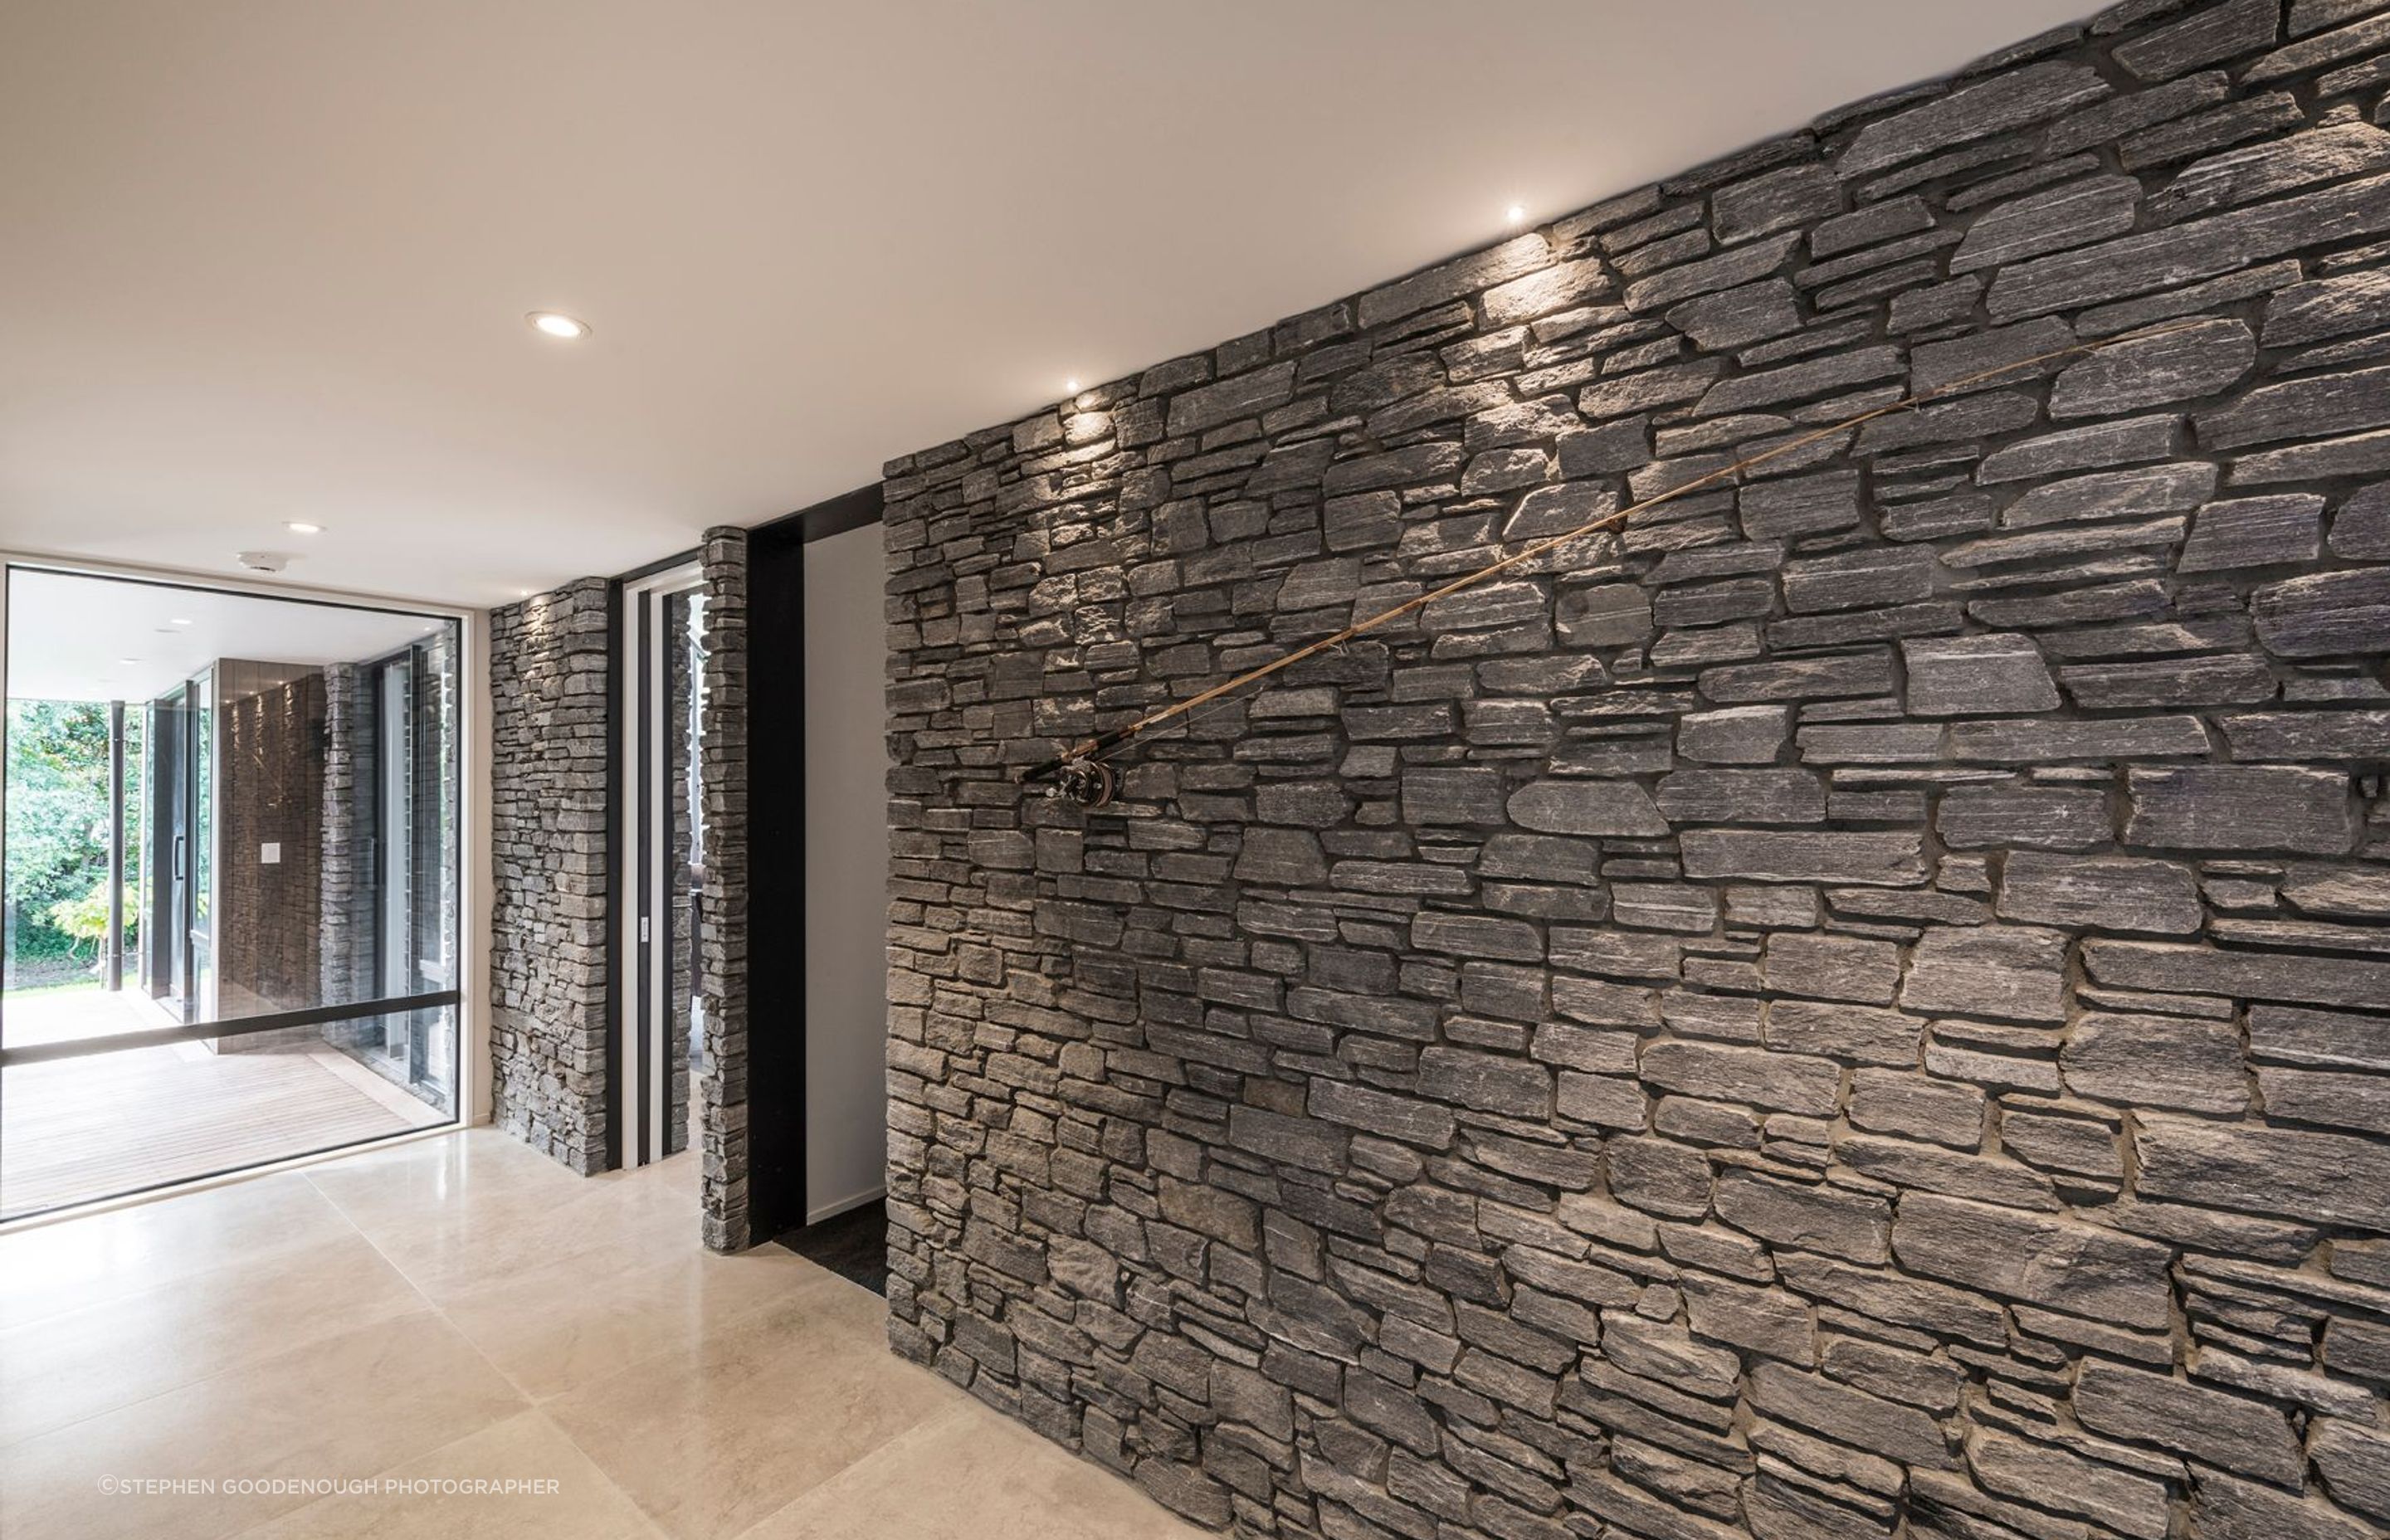 A wall of stone on one side of the entry hall, runs right through the home into the kitchen/dining space.